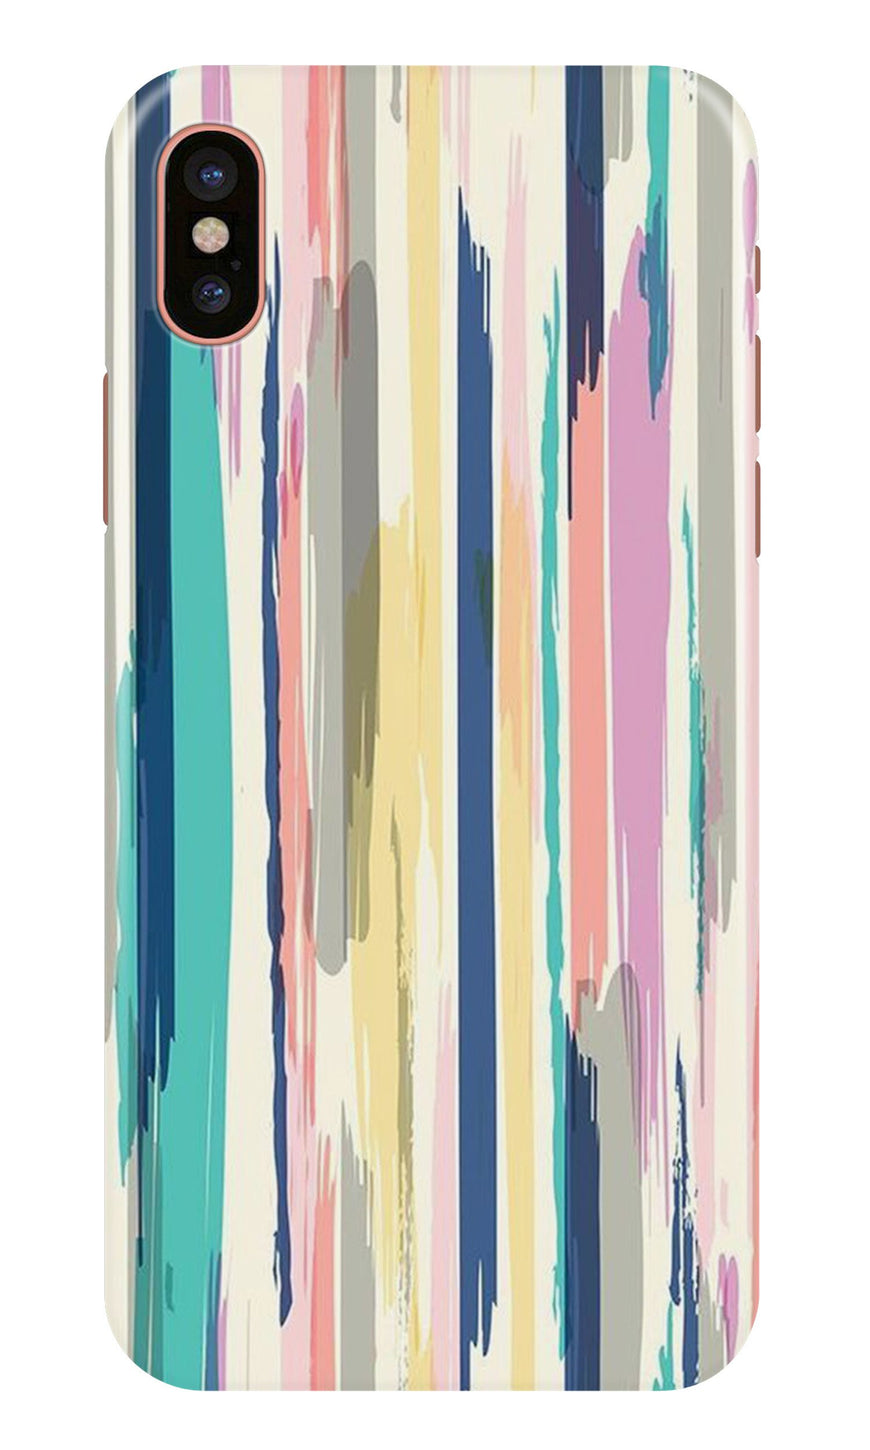 Modern Art Case for iPhone Xs Max (Design No. 241)